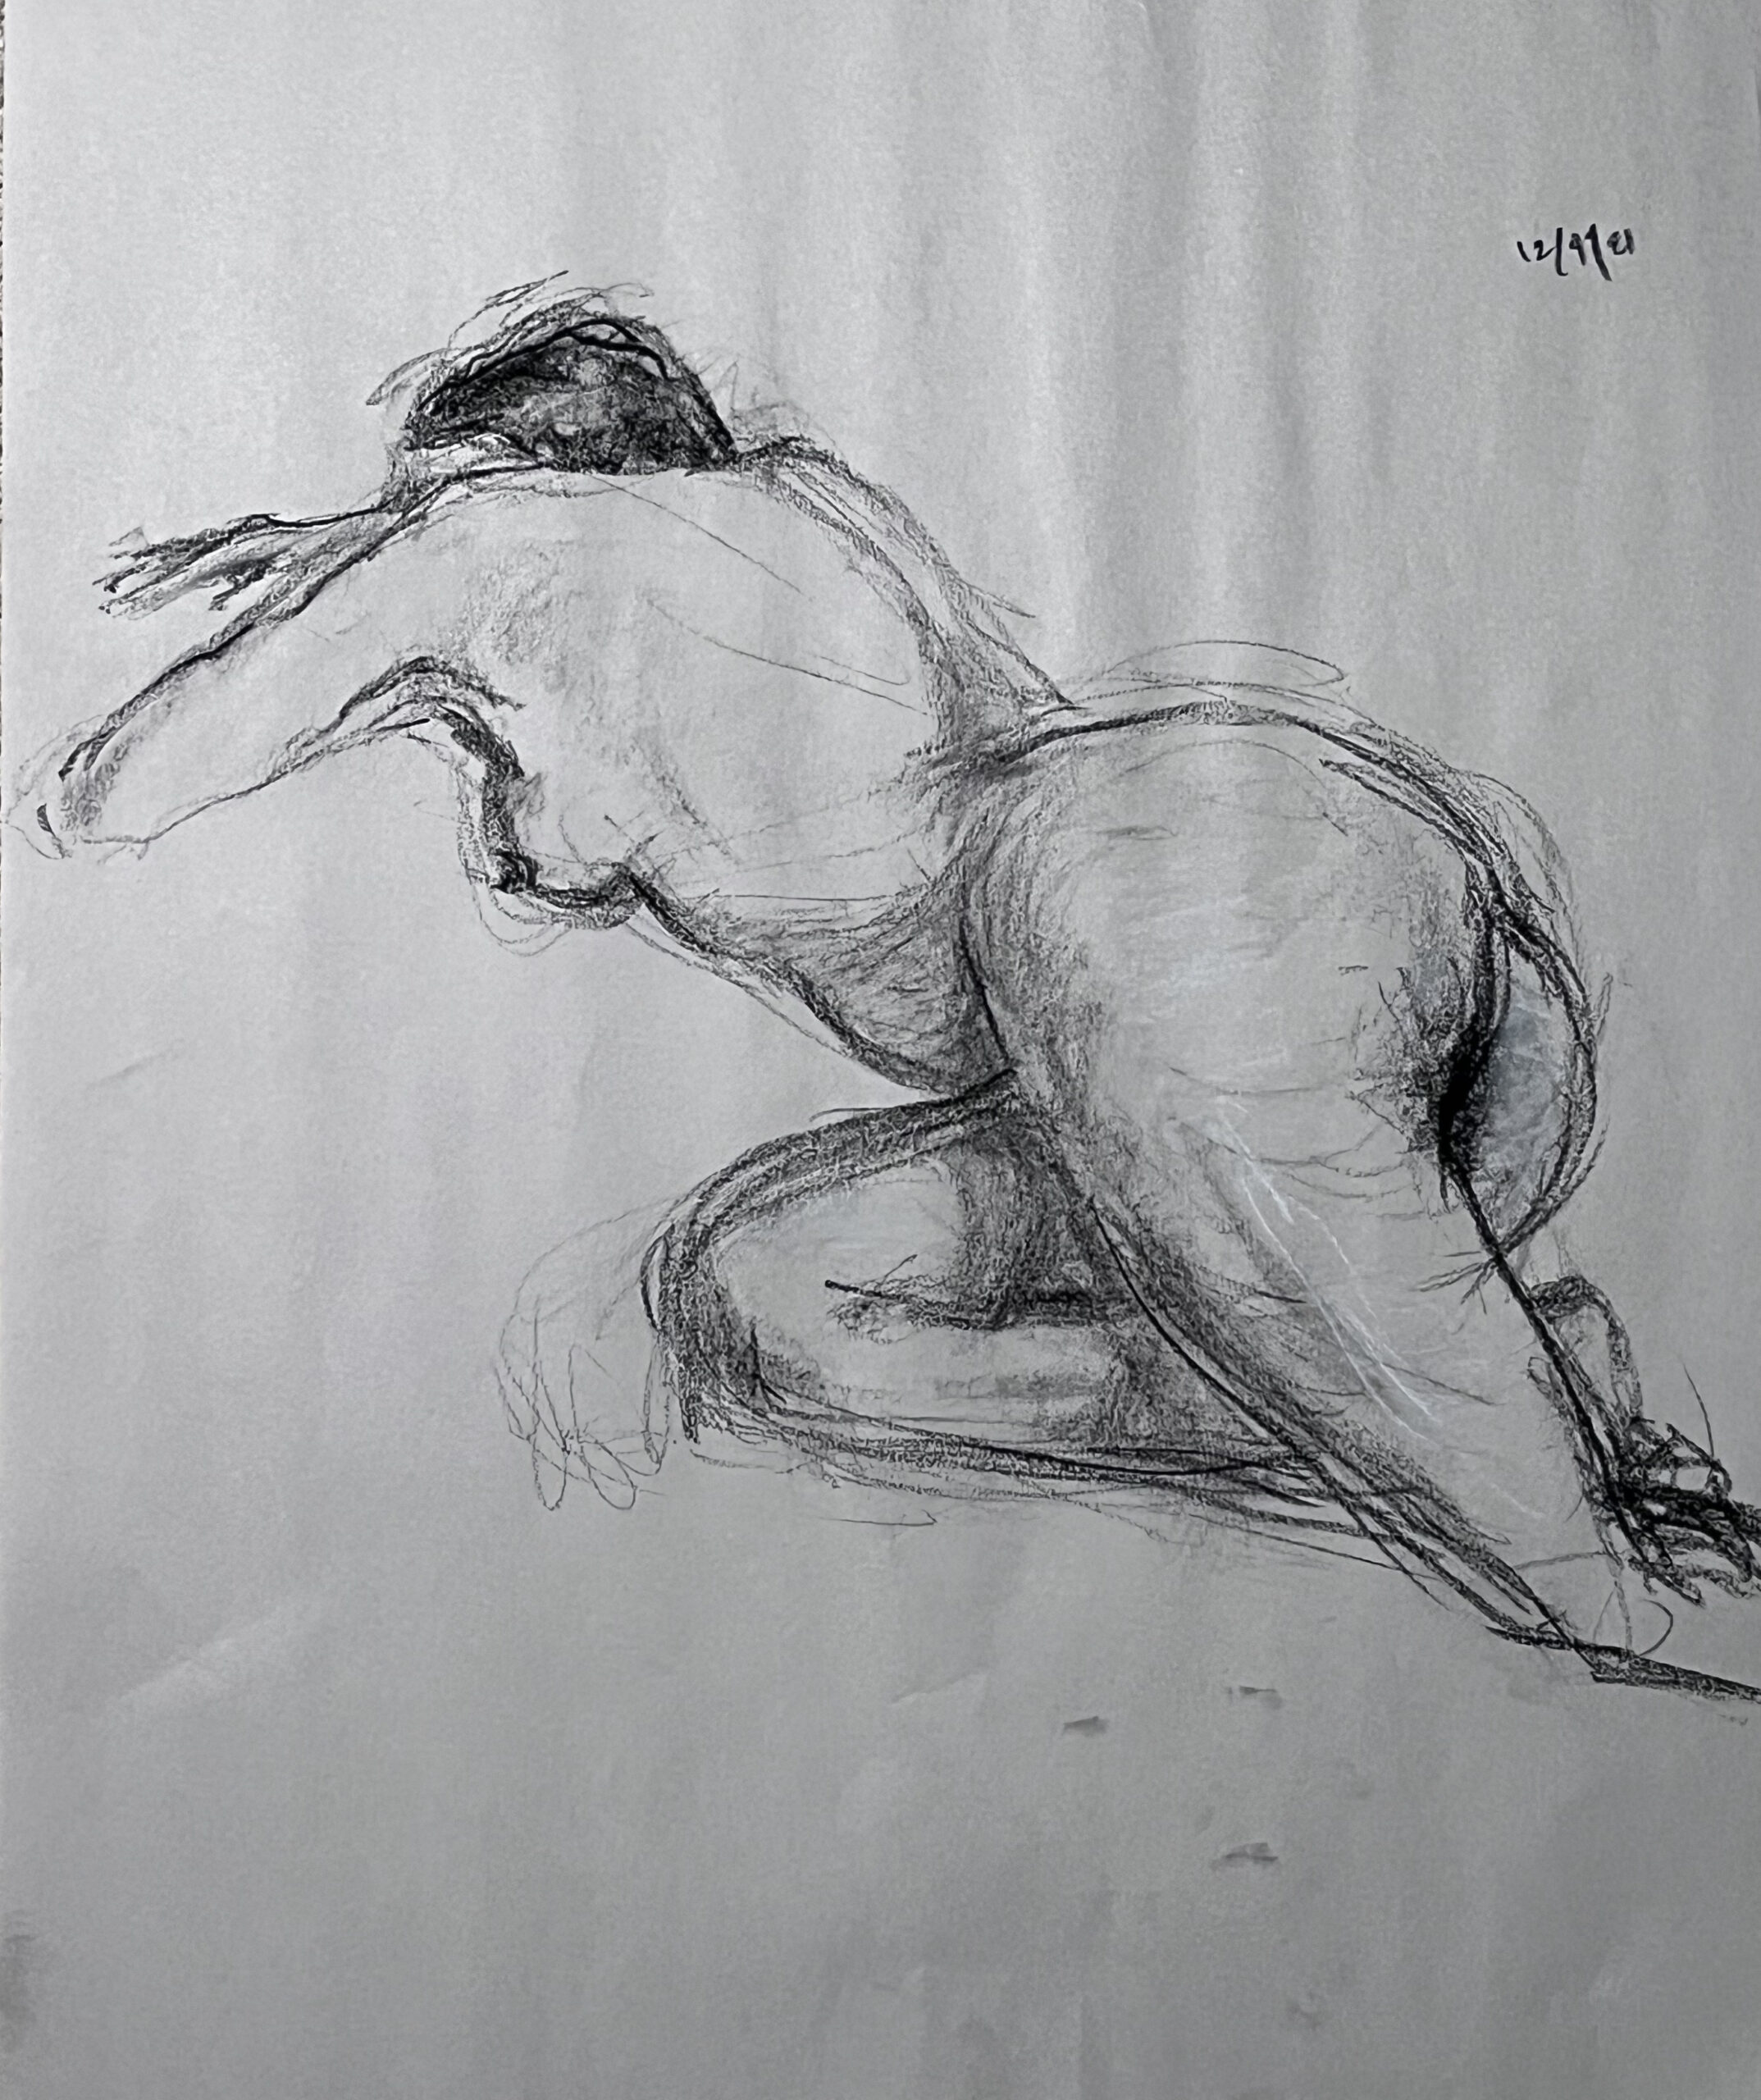 On her Stomach. Figure Drawing.